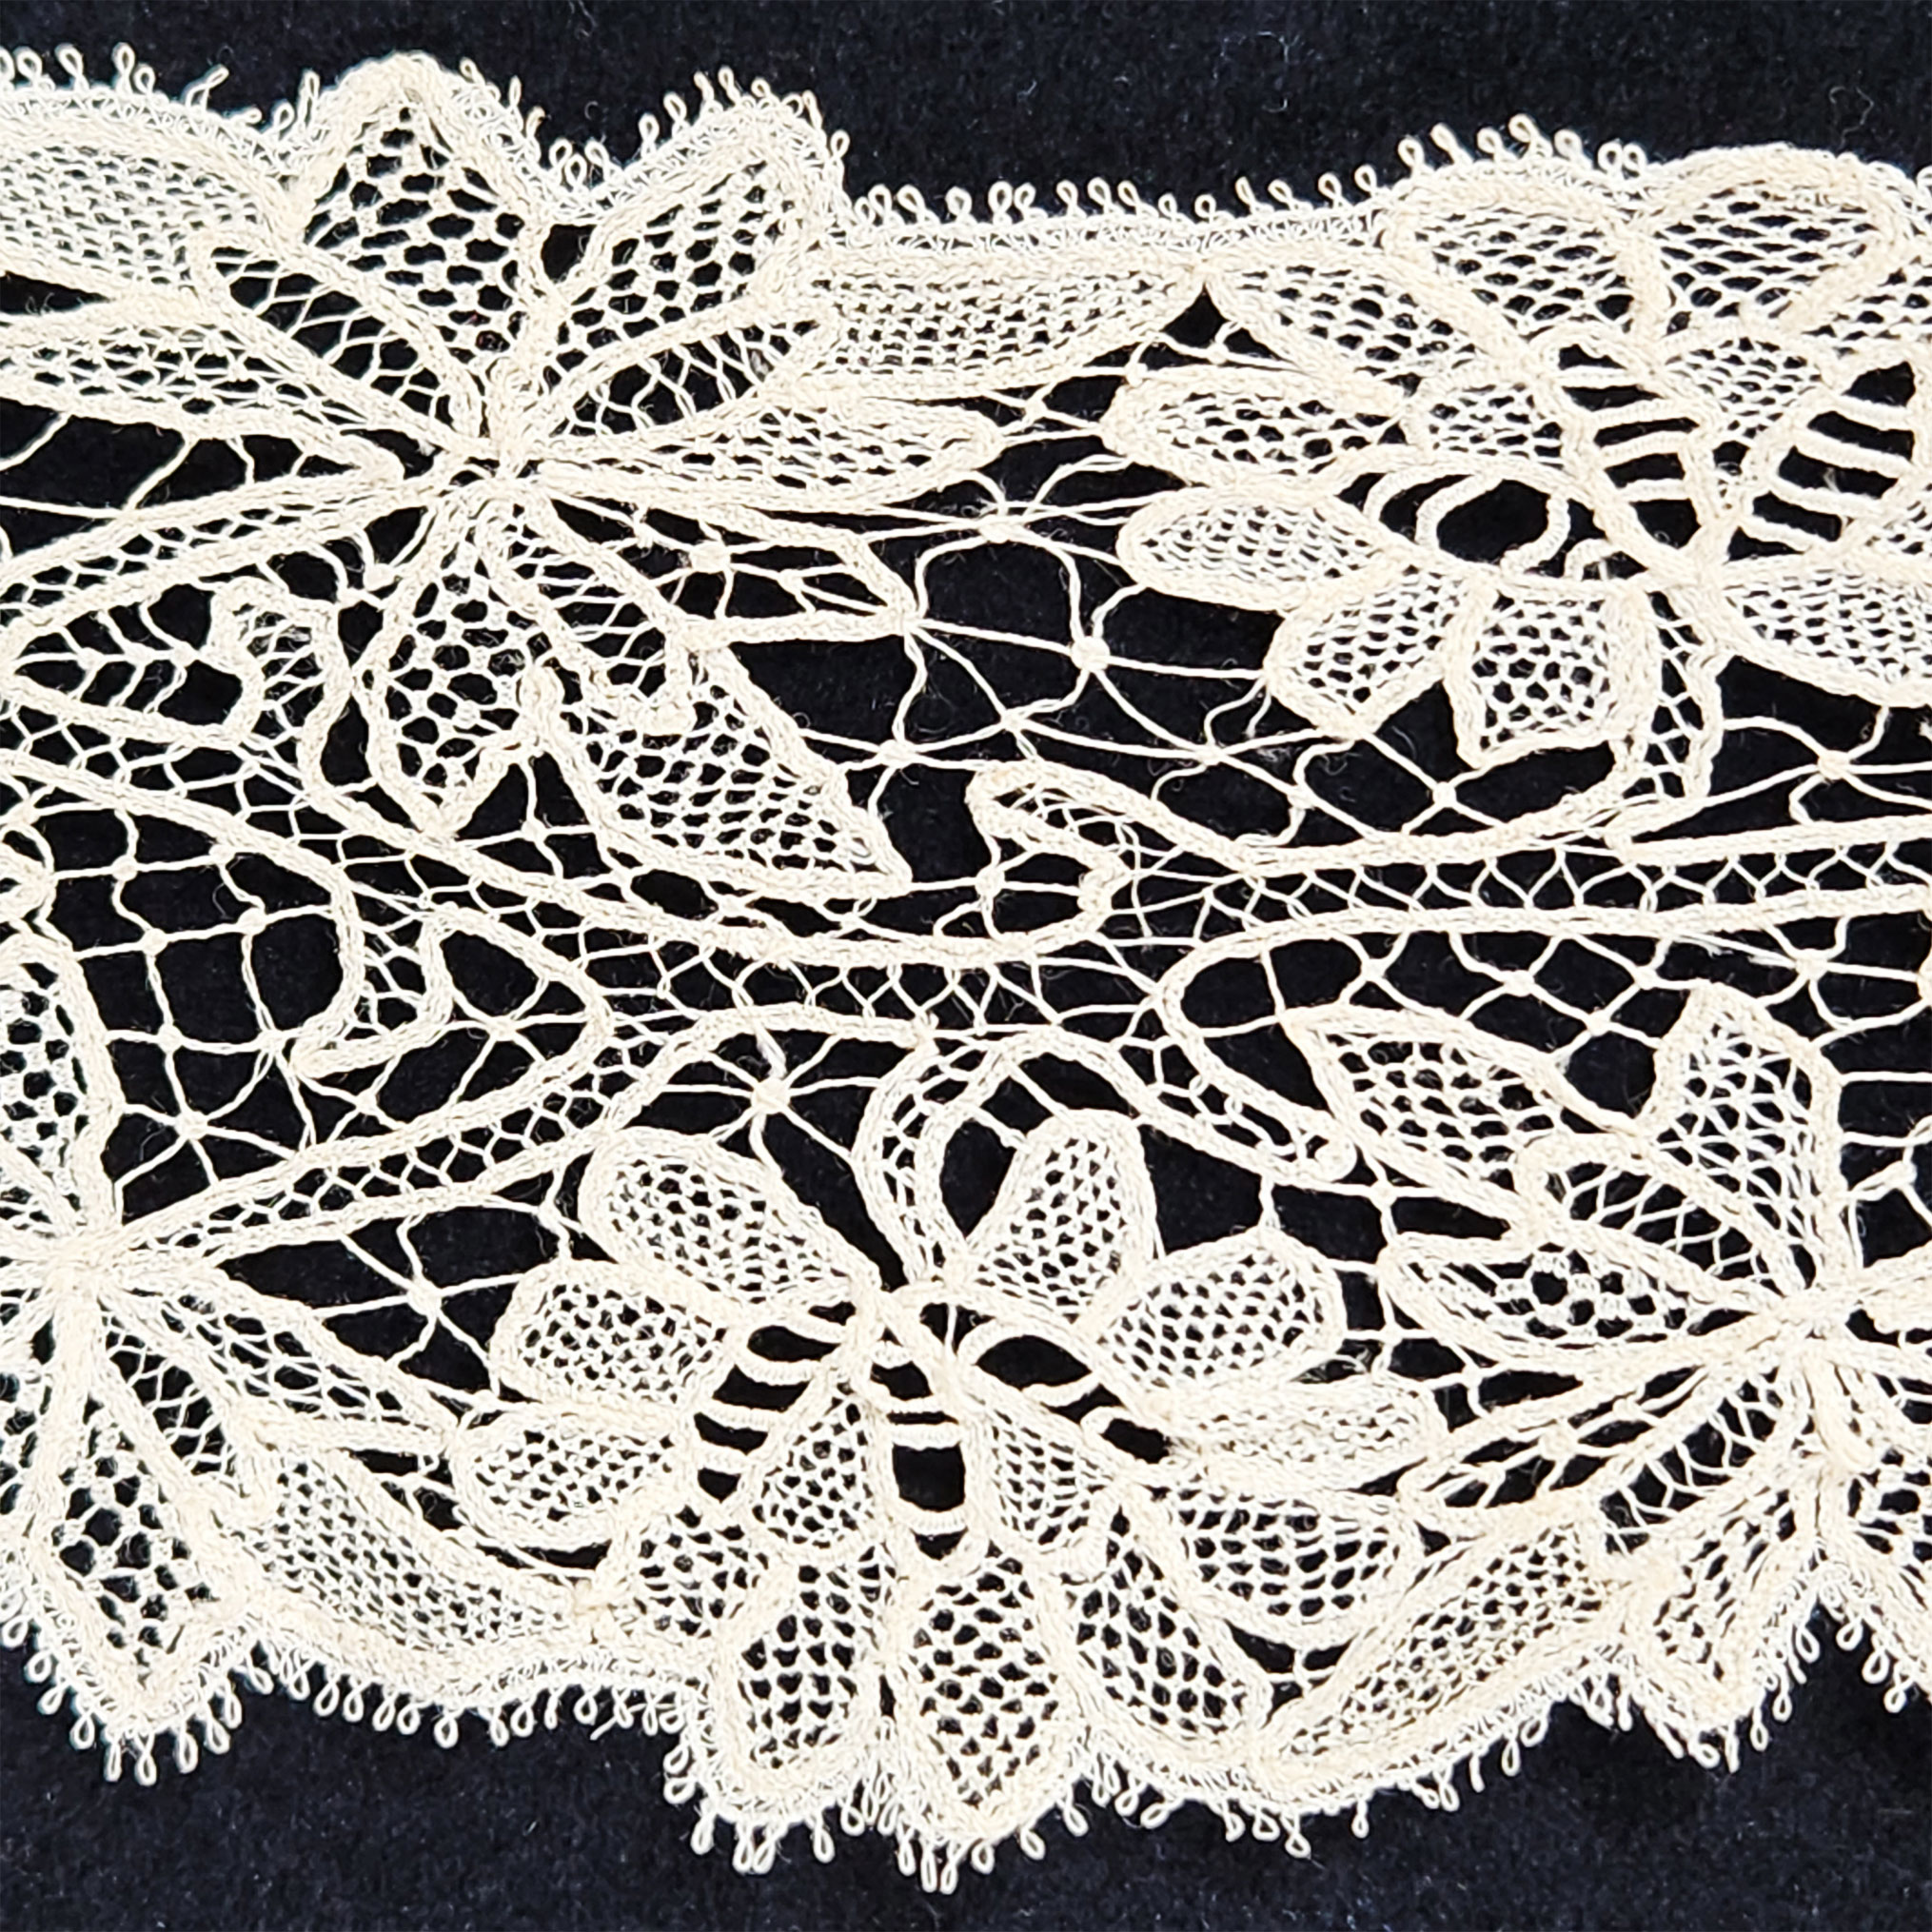 Intricately hand-woven lace by Susannah Van Valkenburg